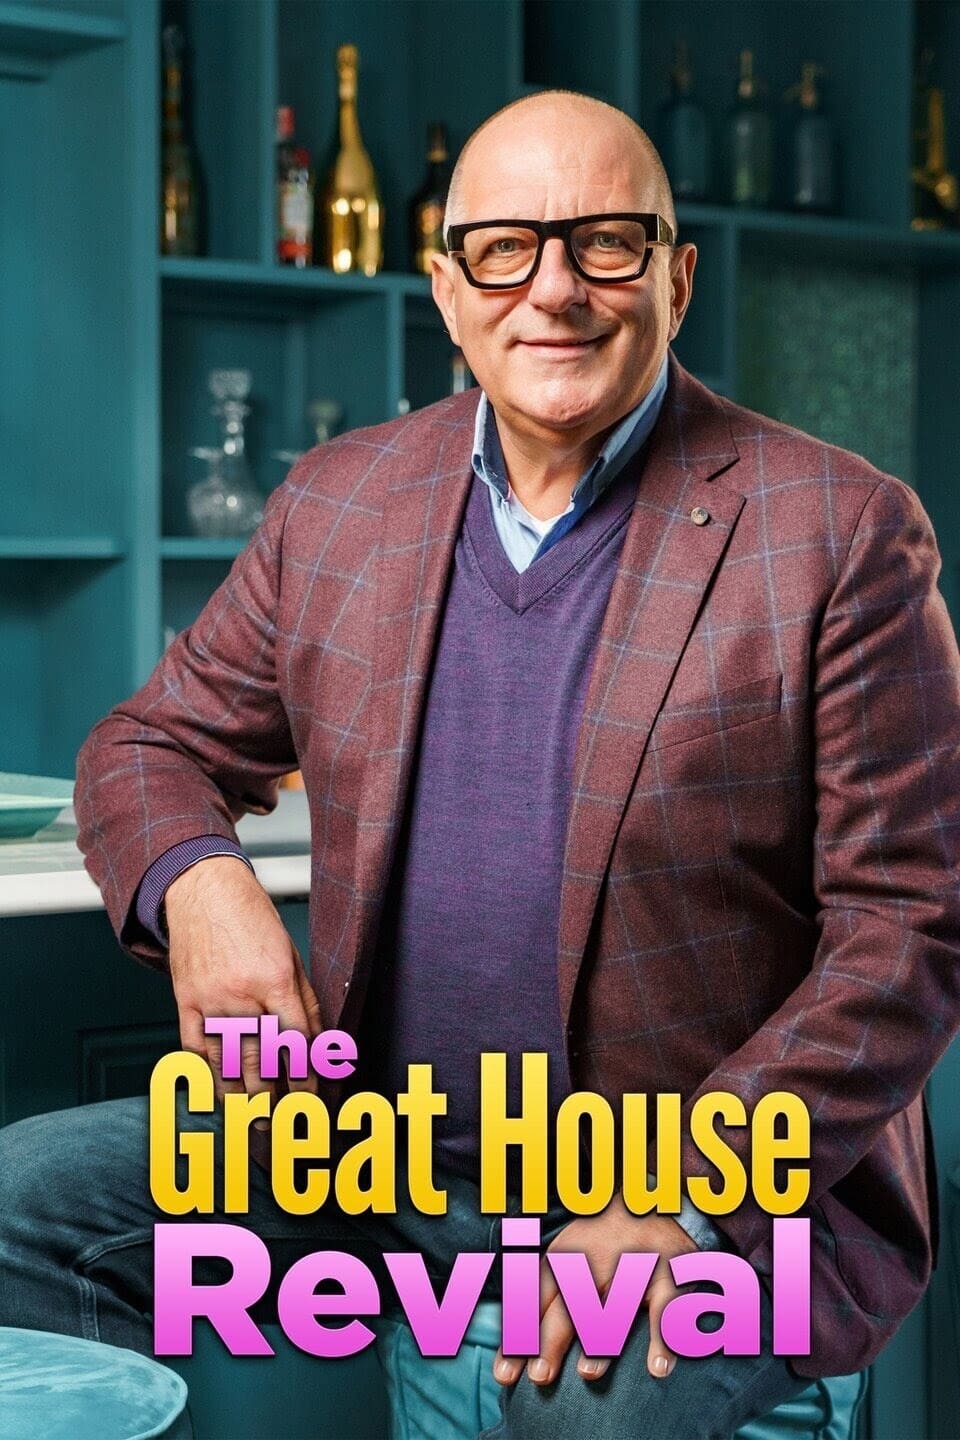 The Great House Revival